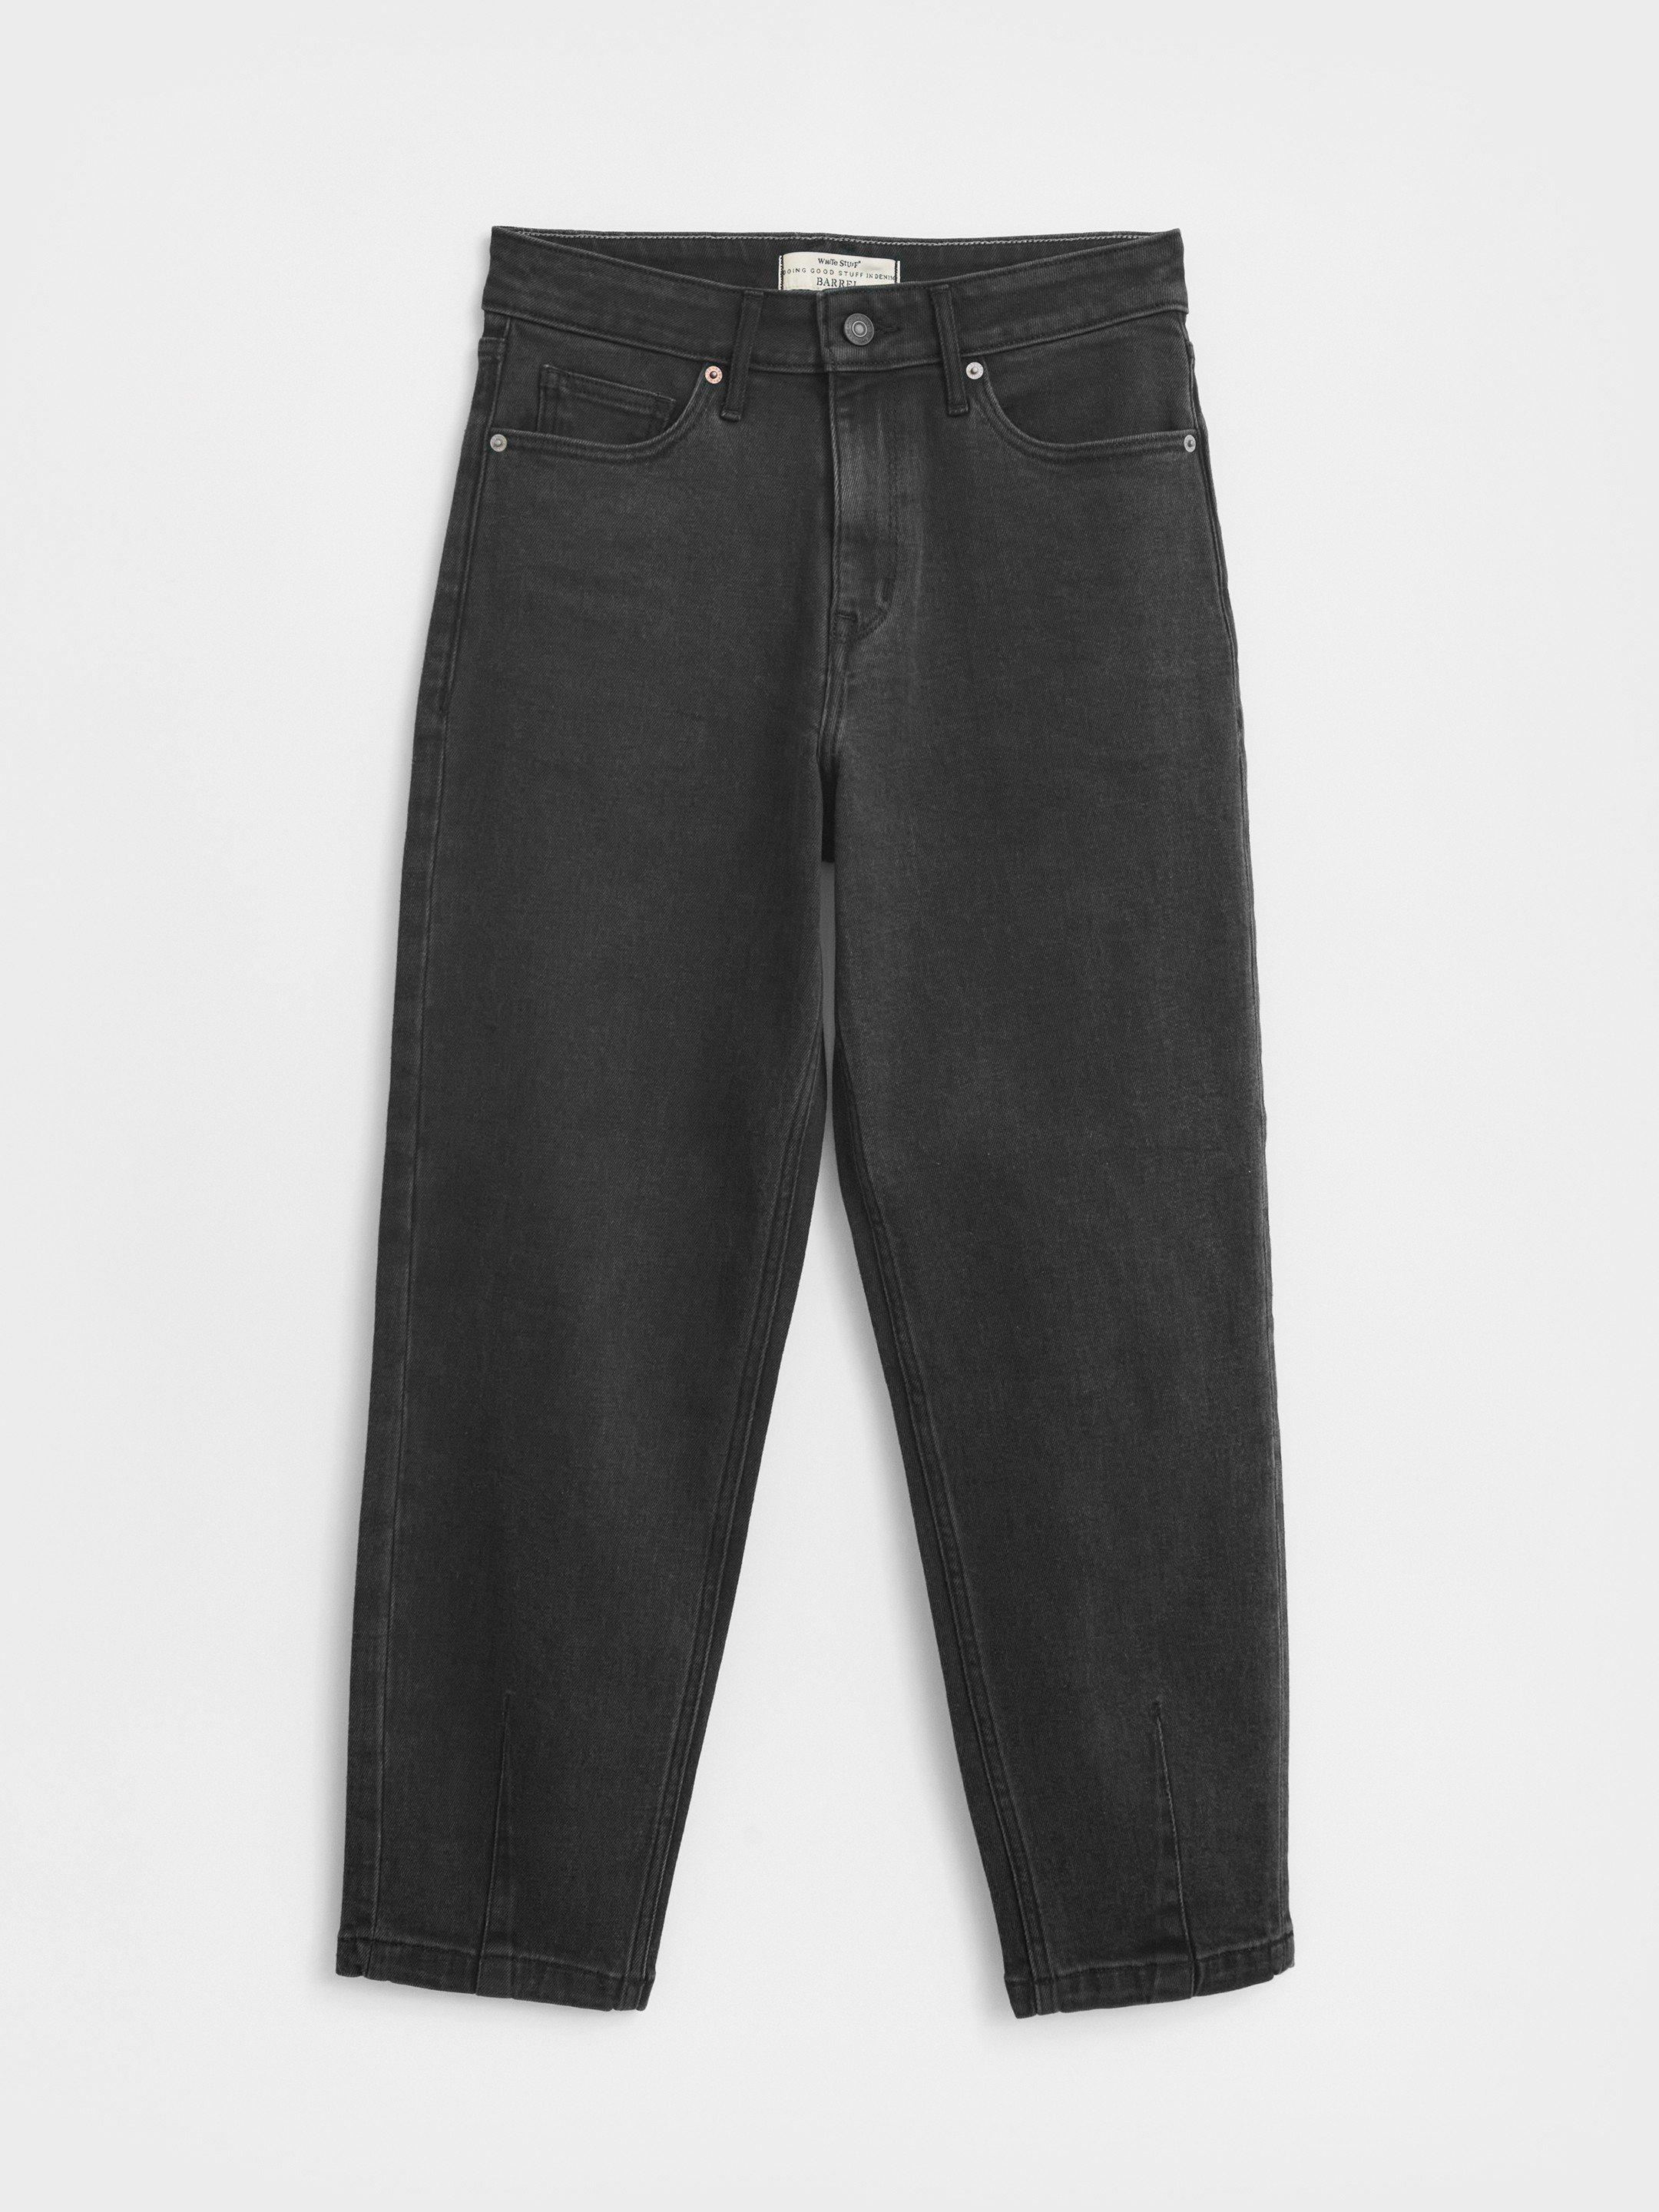 Robyn Barrel Mid Rise Jean in WASHED BLK - FLAT FRONT